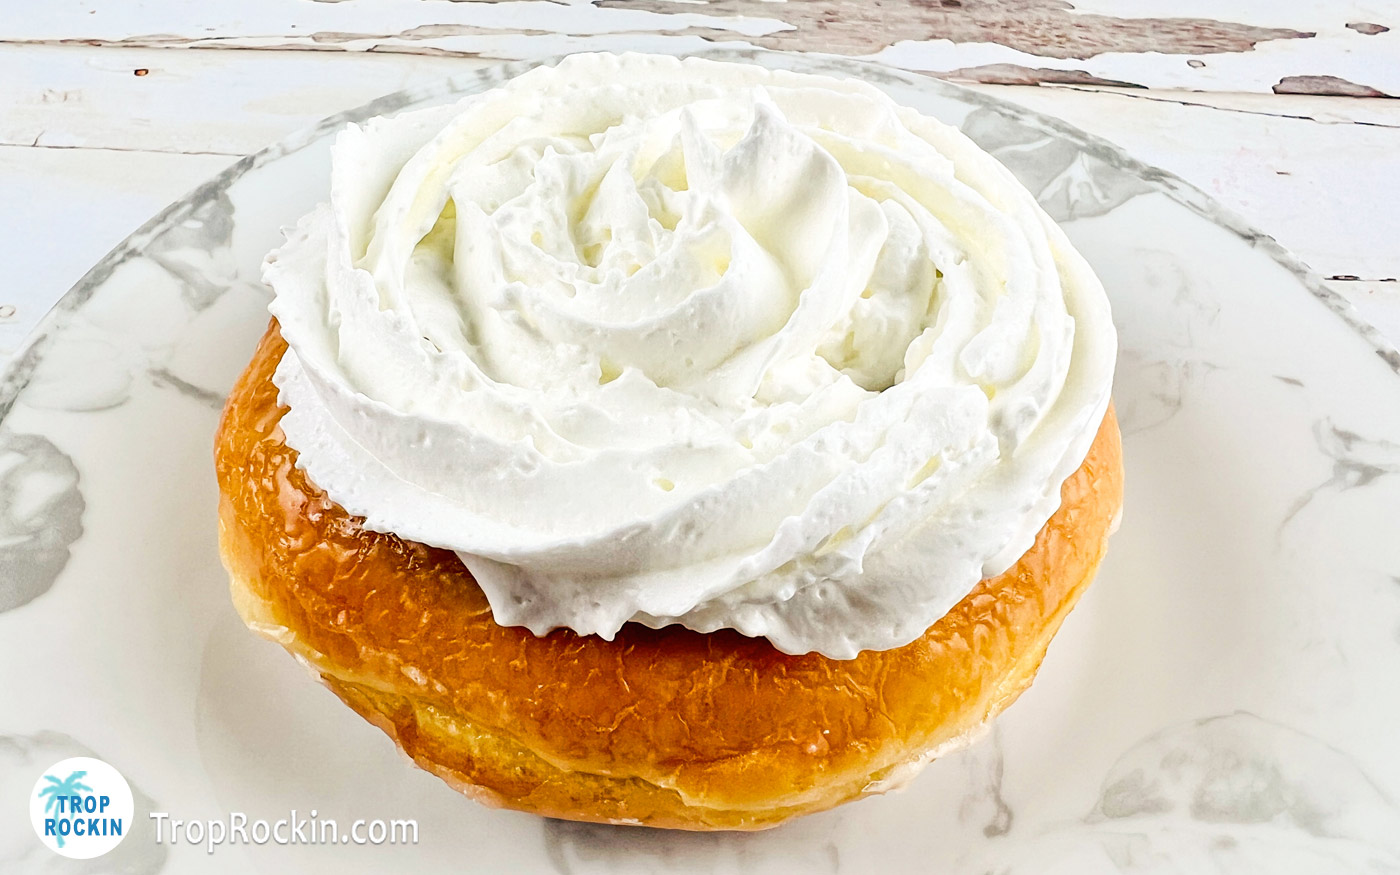 Glazed donut with a layer of whipped cream added on top.